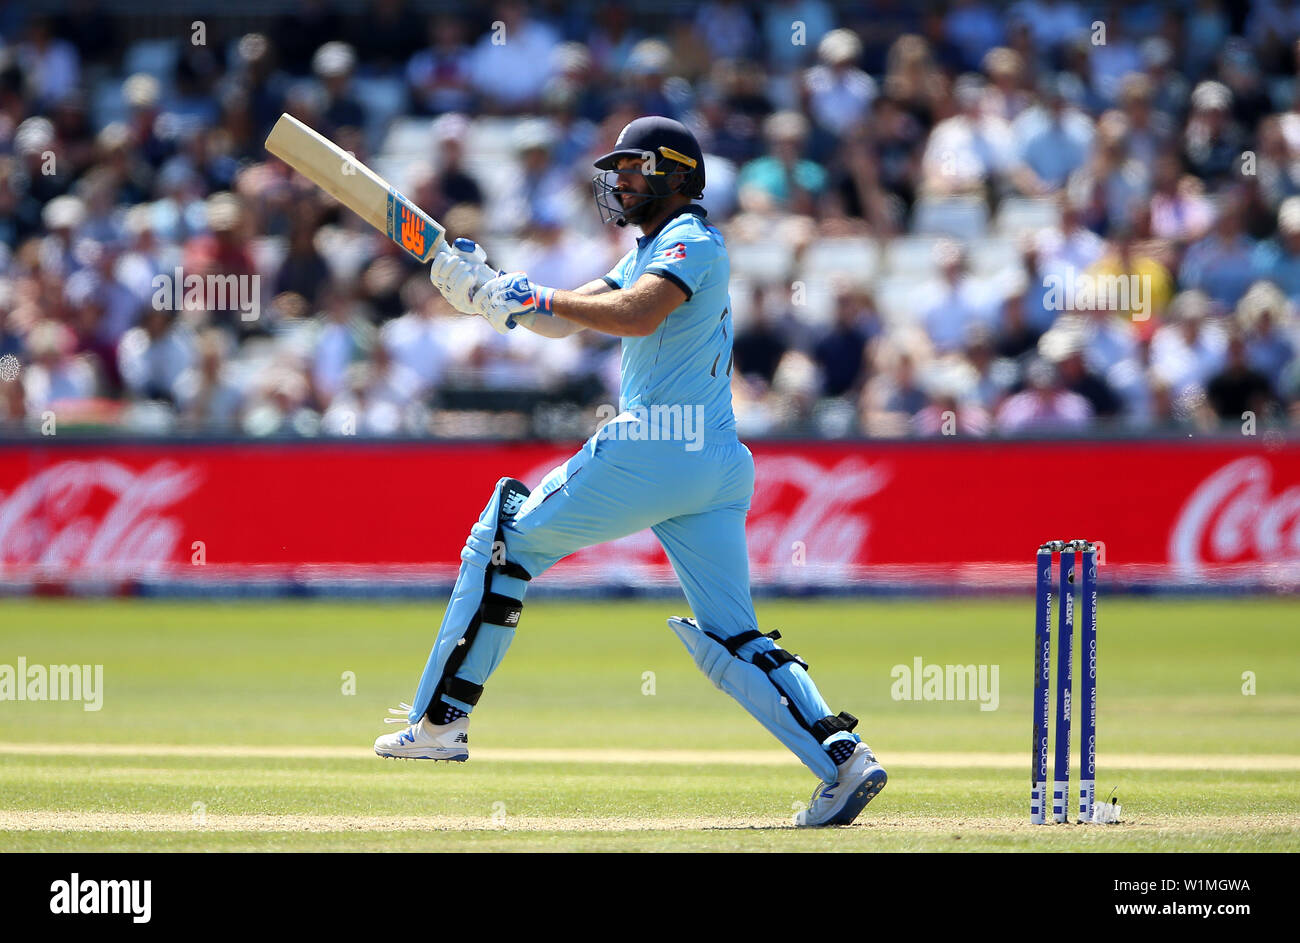 England's Liam Plunkett batting during the ICC Cricket World Cup group stage match at Riverside Durham, Chester-le-Street. Stock Photo